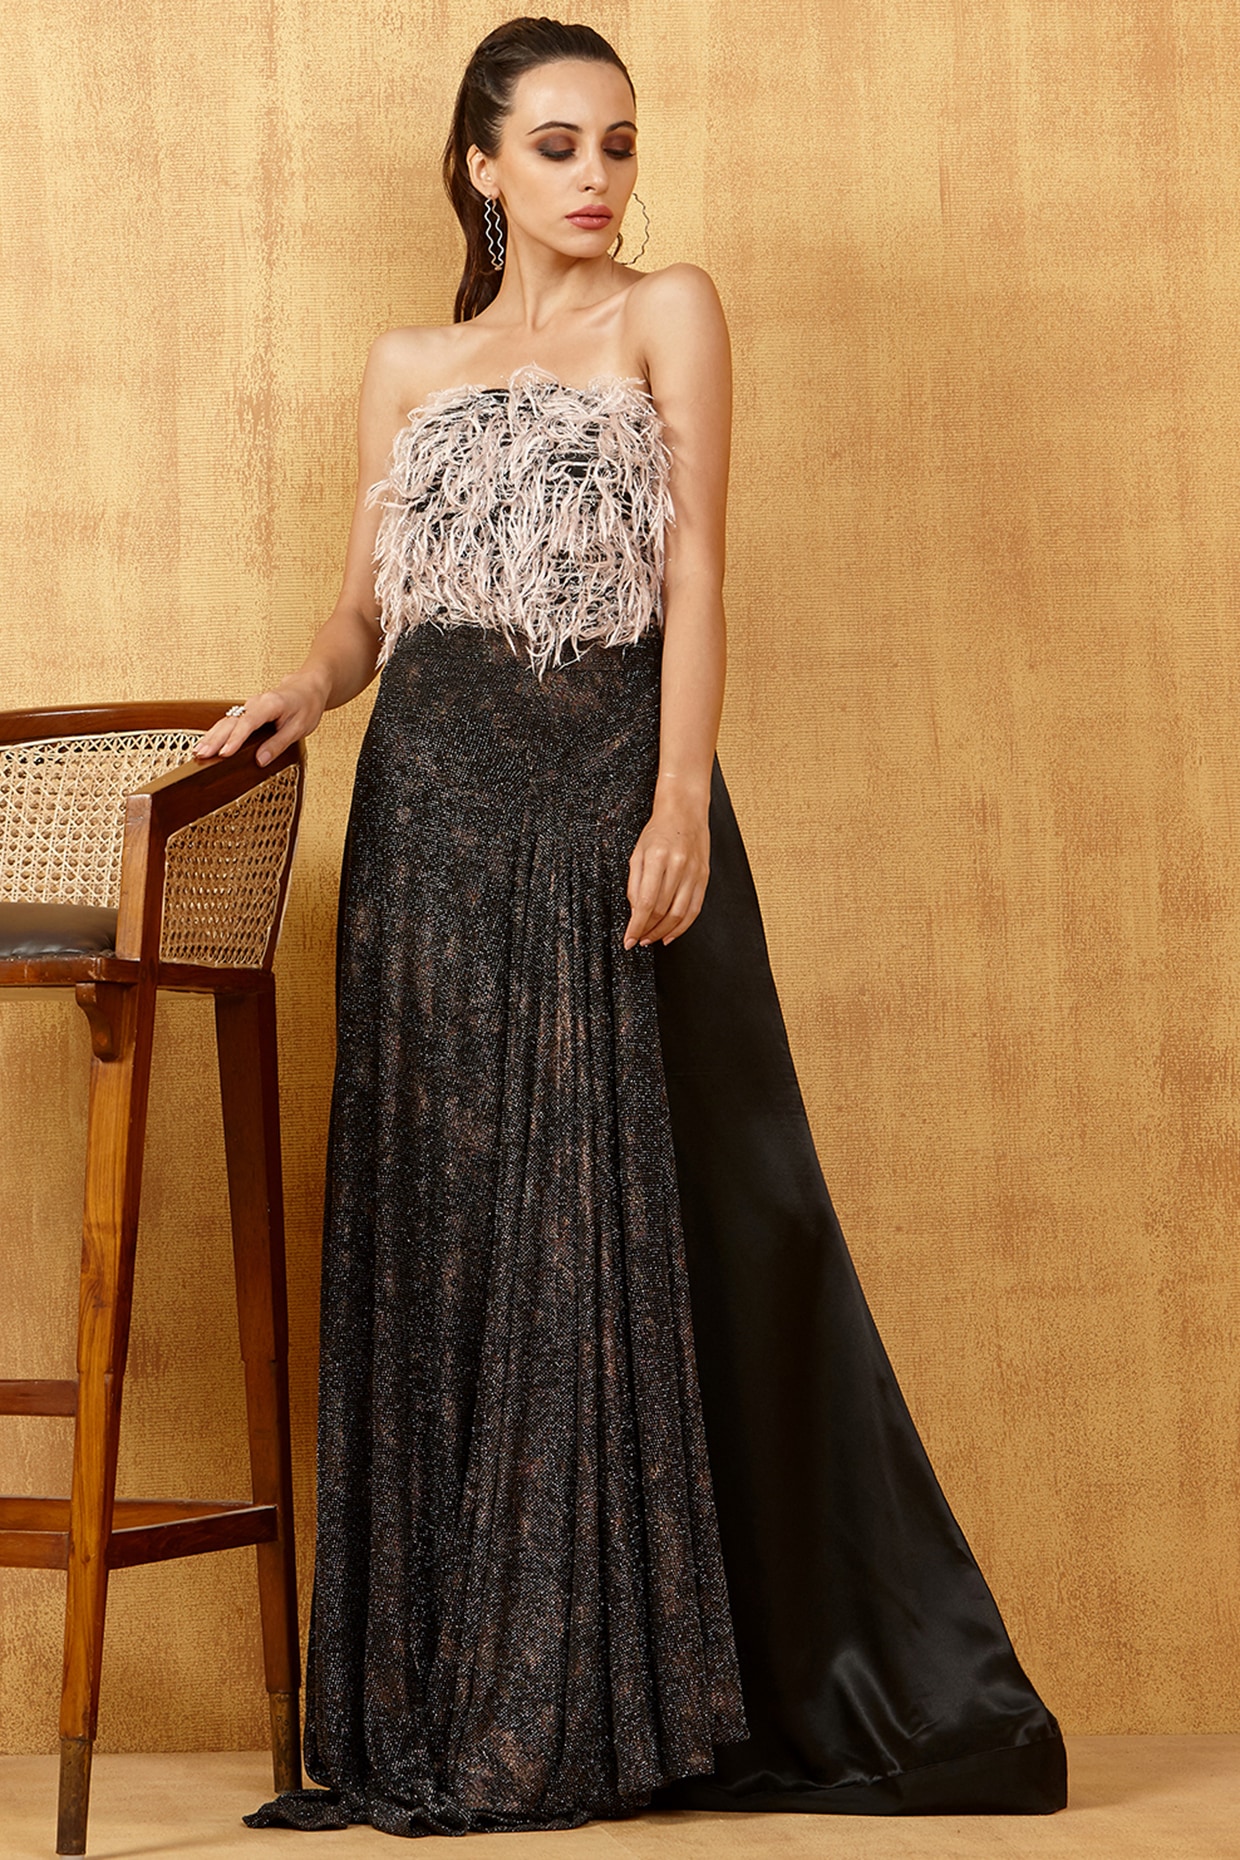 AND Black & Gold Shimmer Dress in Kakinada at best price by Sona Shopping  Mall - Justdial